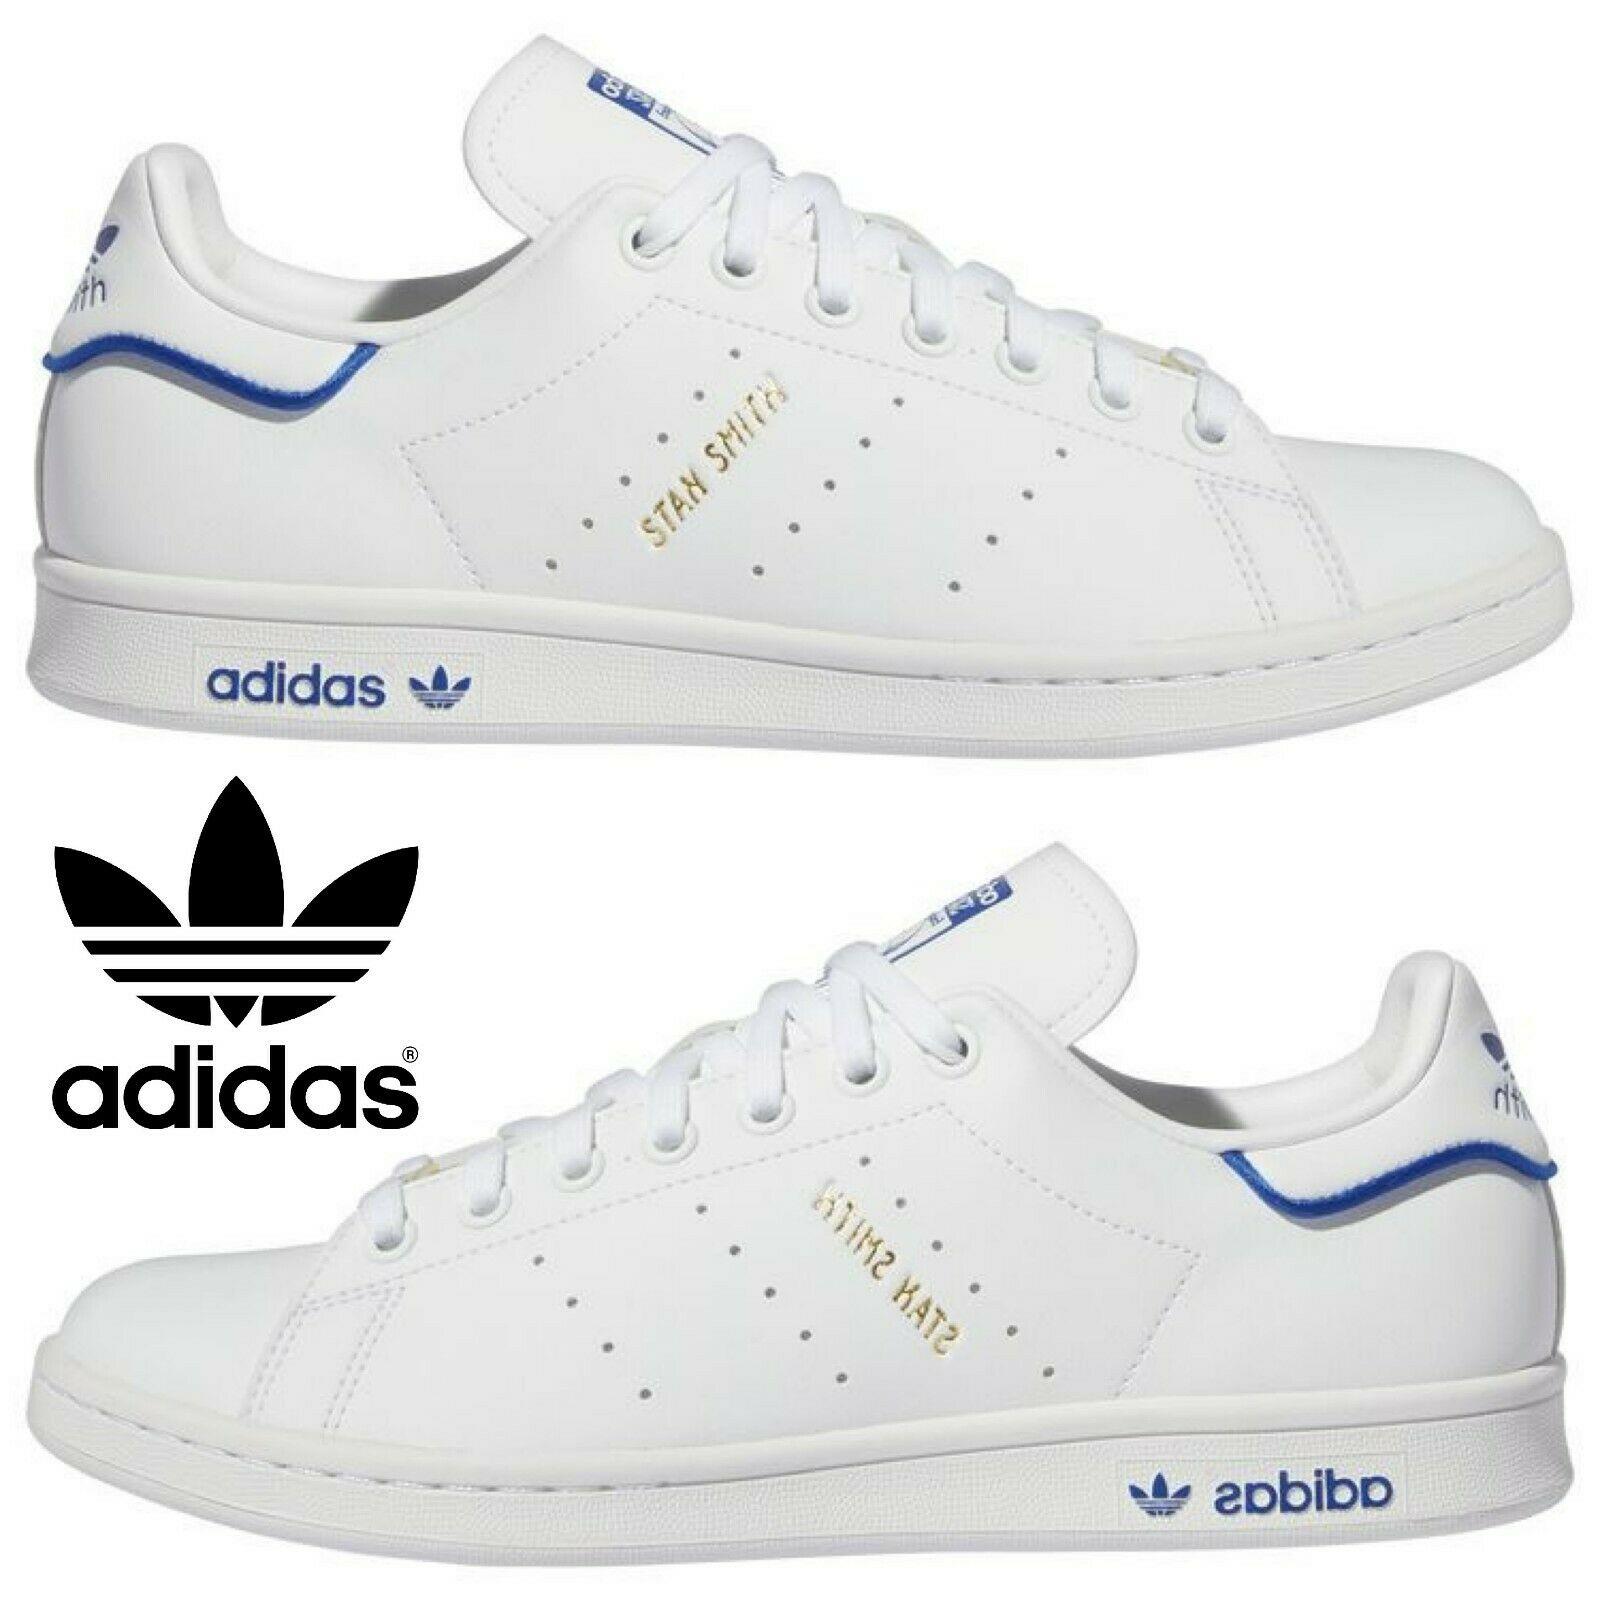 Adidas Originals Stan Smith Men`s Sneakers Comfort Sport Casual Shoes White